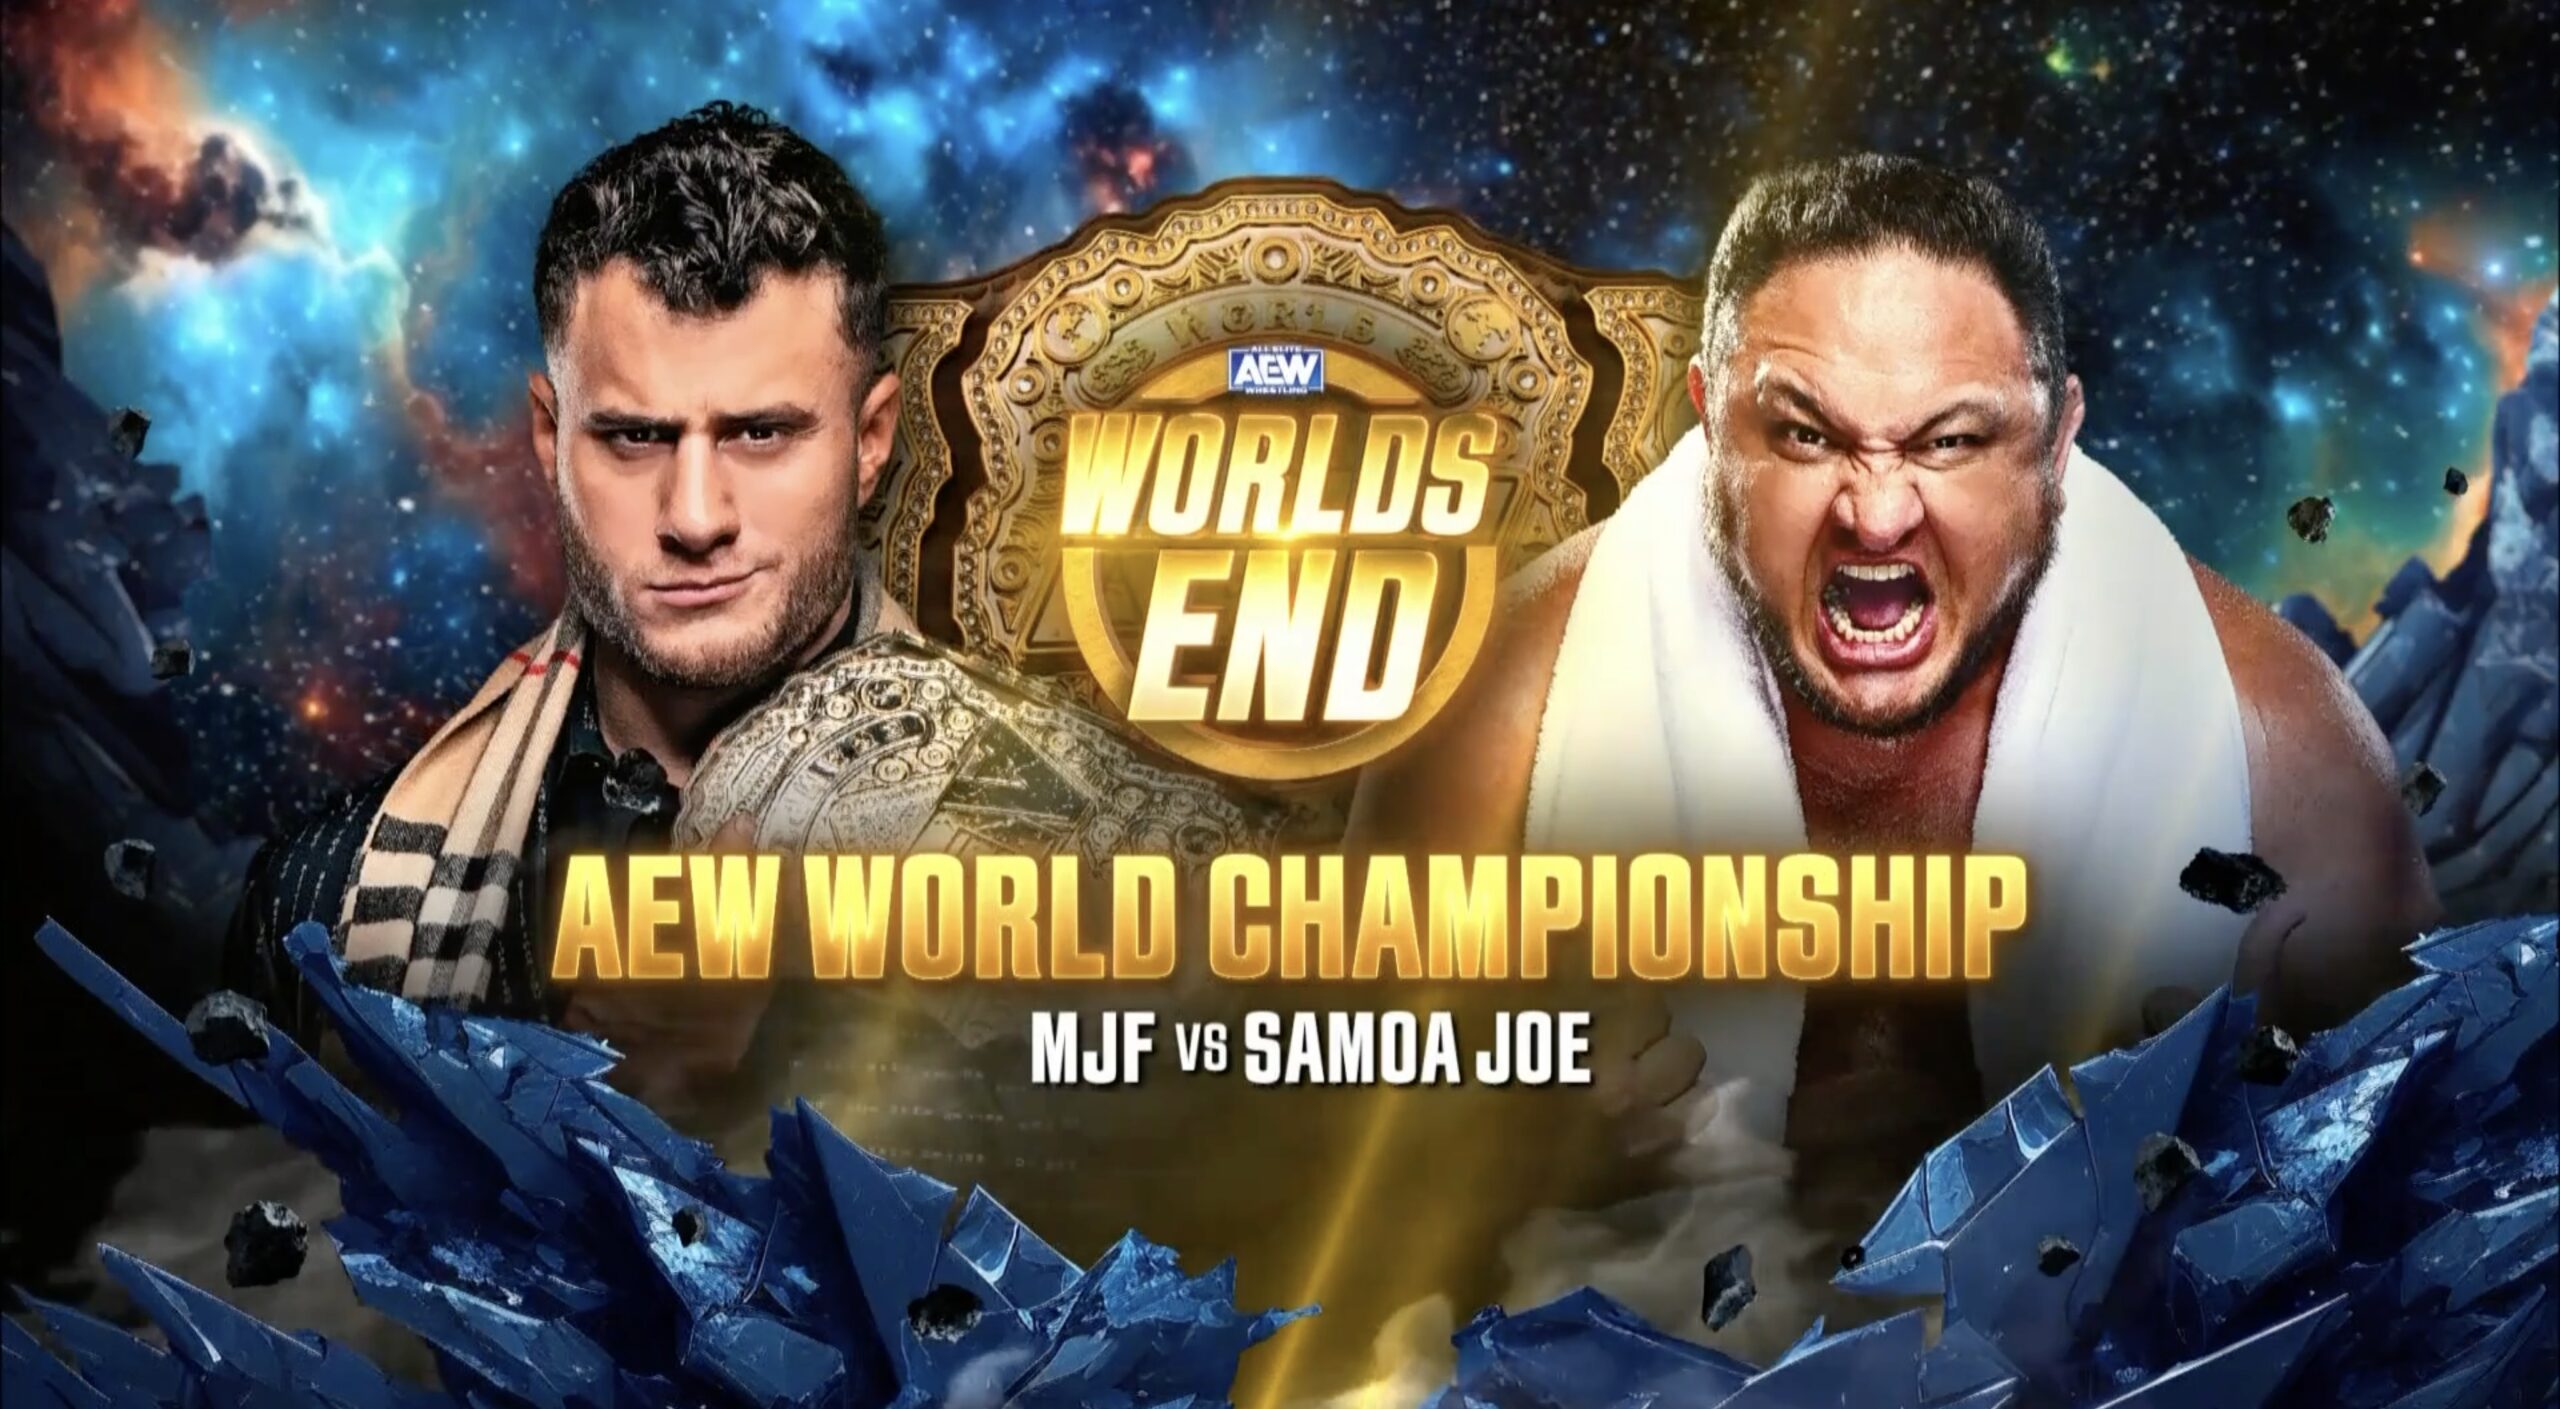 AEW Worlds End Review: The Devil Is Revealed